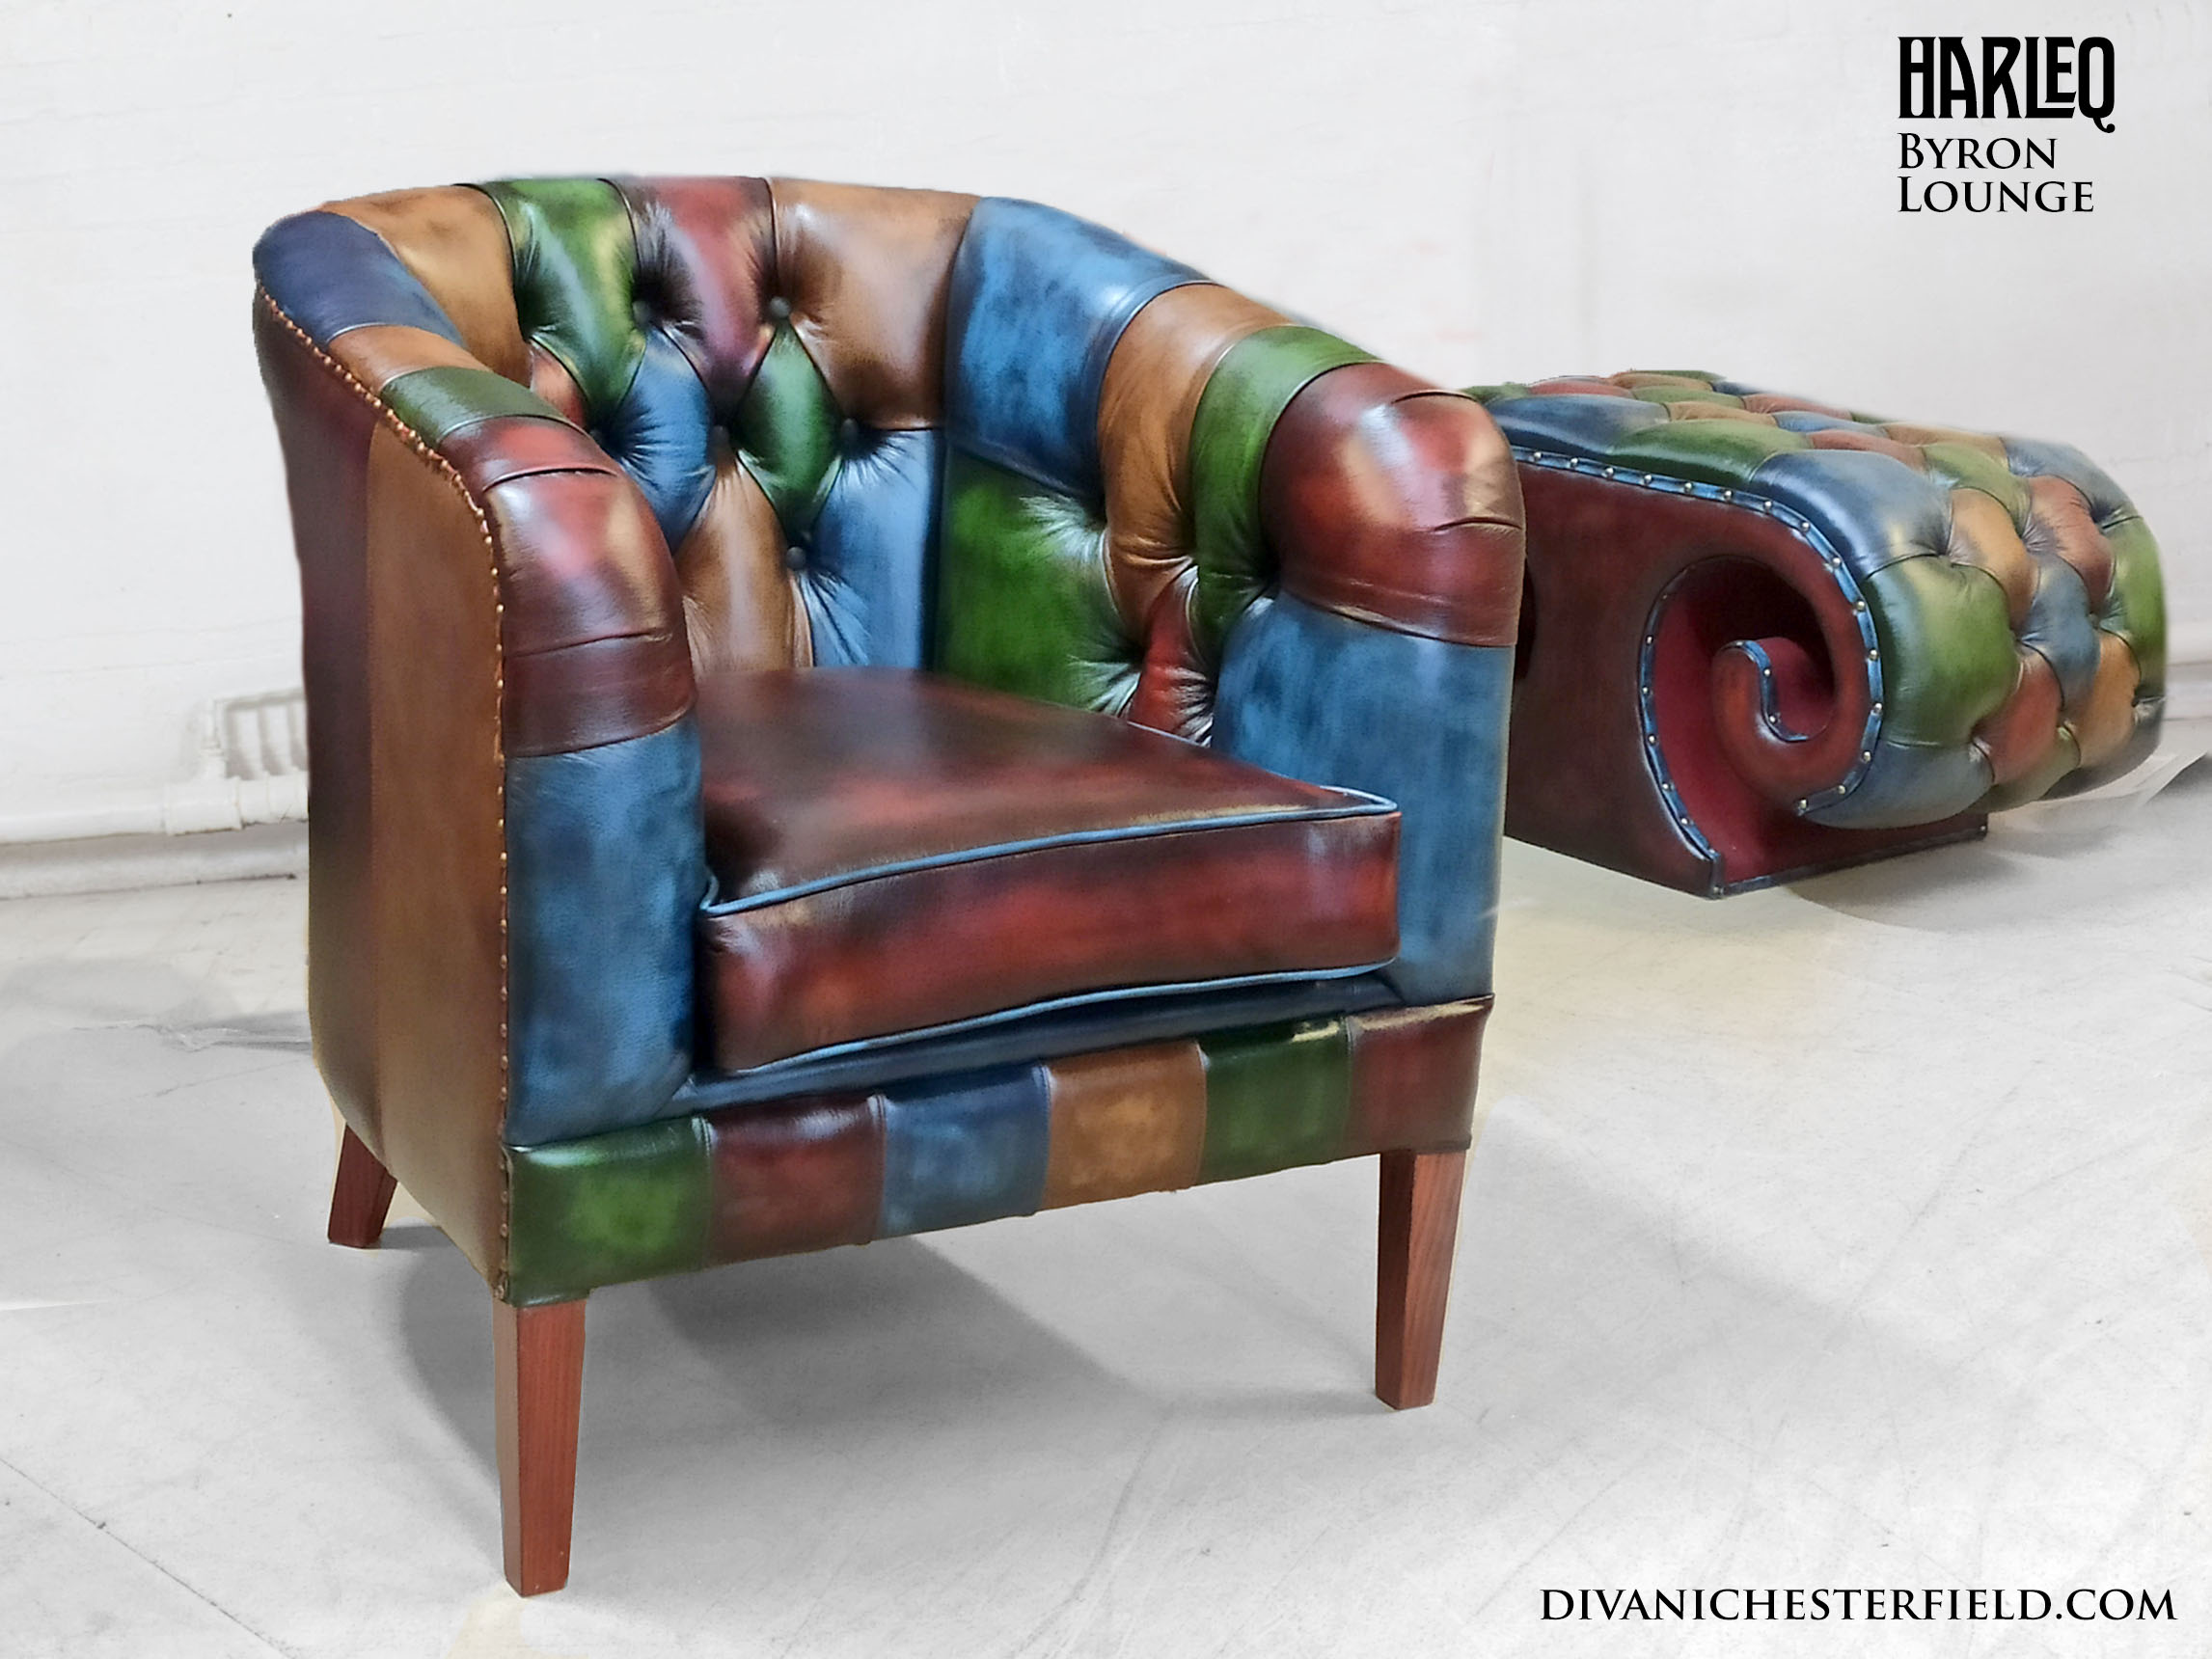 poltrona chesterfield patchwork harleq lounge luxury chair